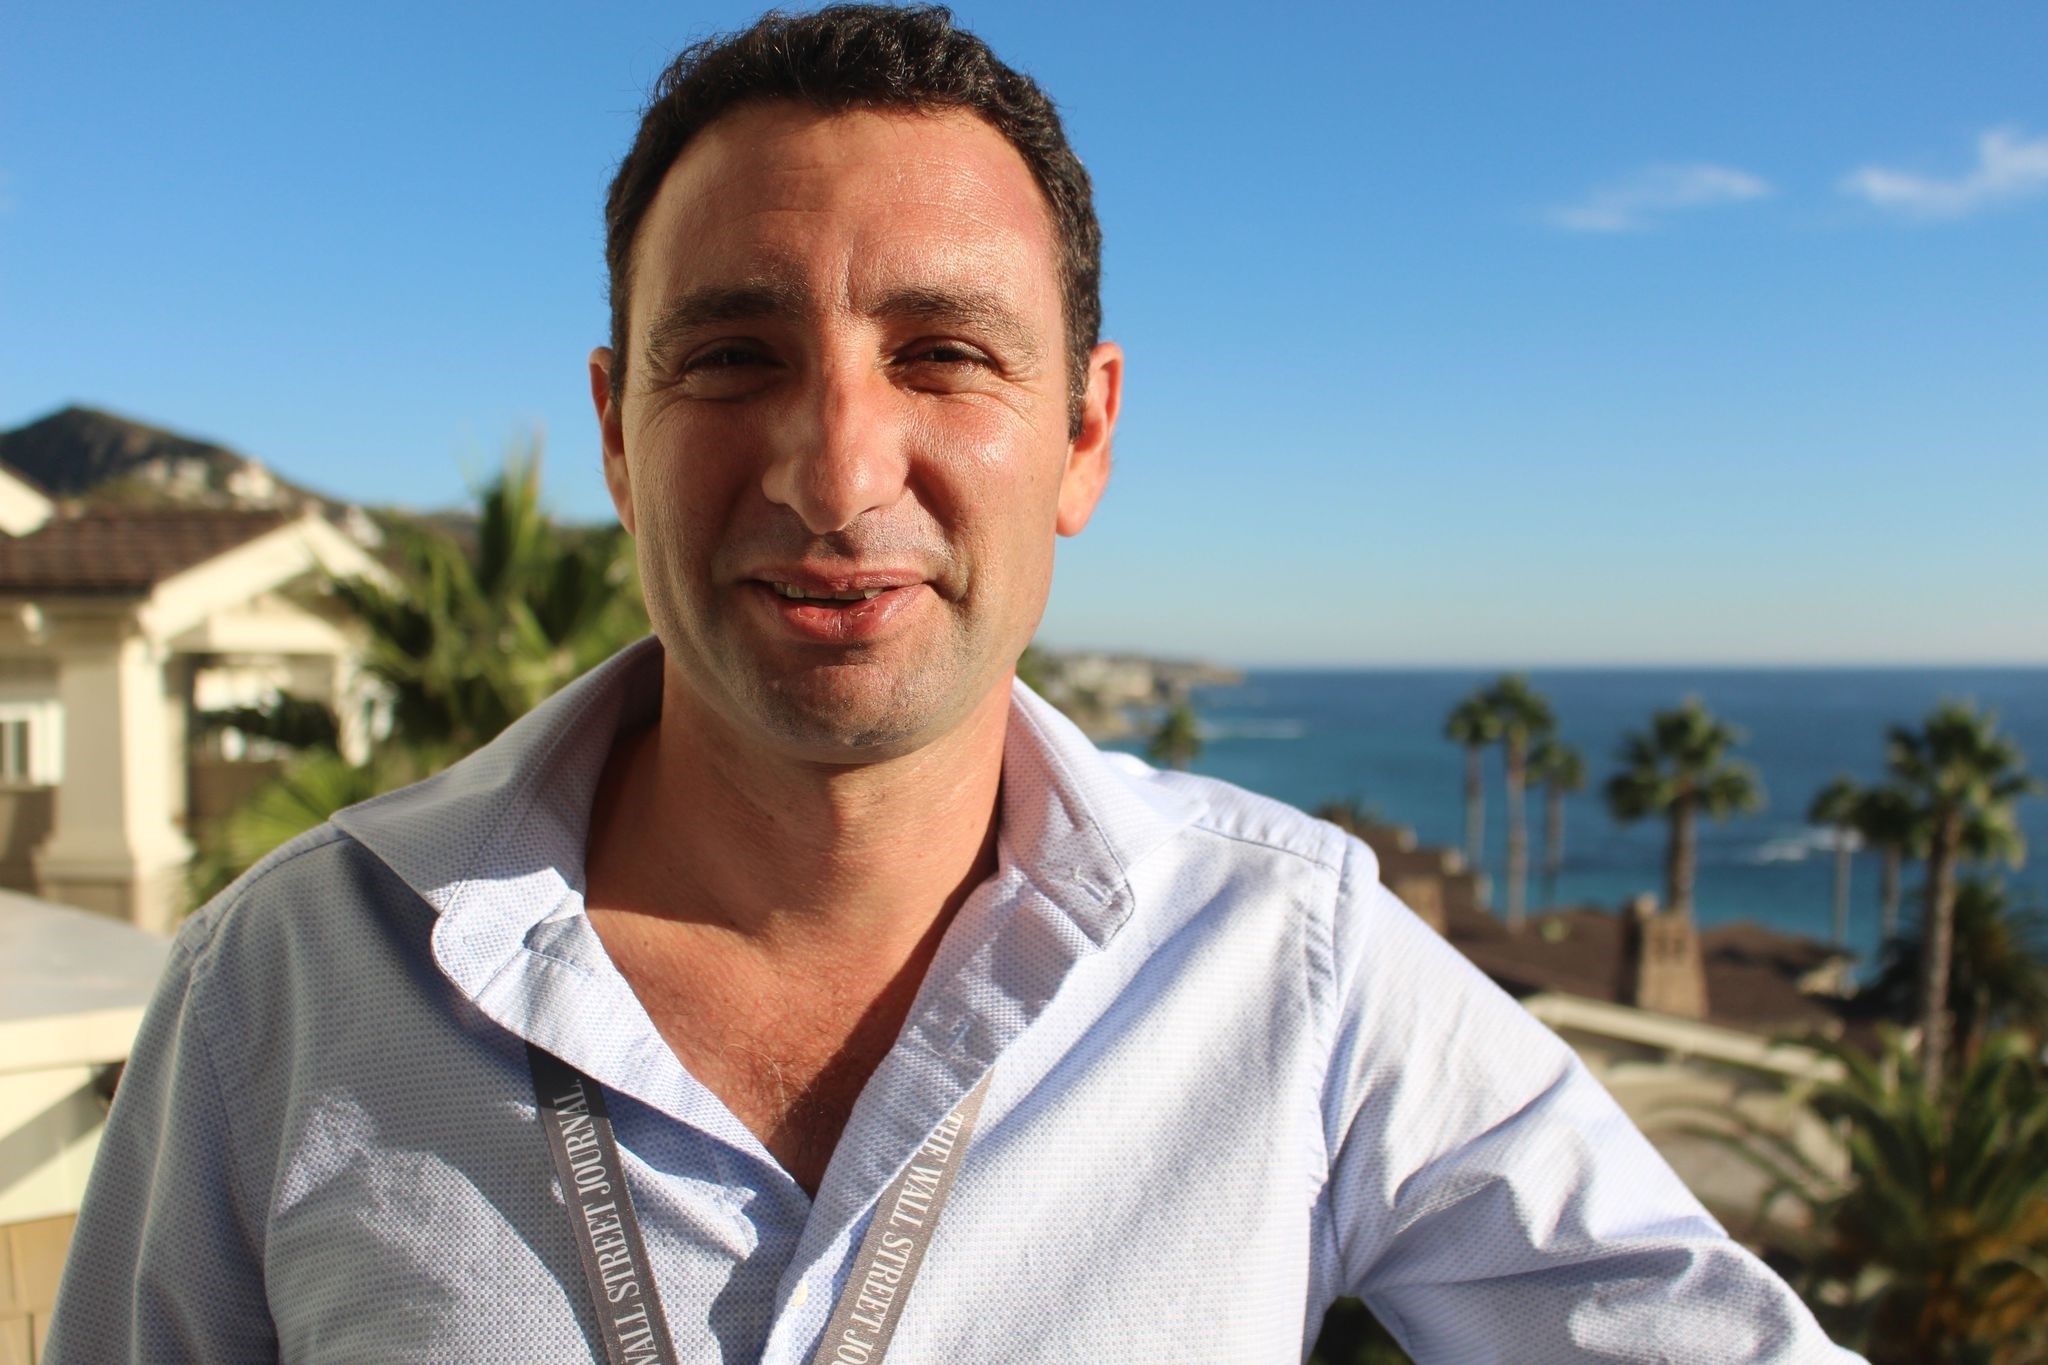 Eviation Aircraft co-founder and CEO Omer Bar-Yohay poses during a break at the WSJD Live conference in Laguna Beach.